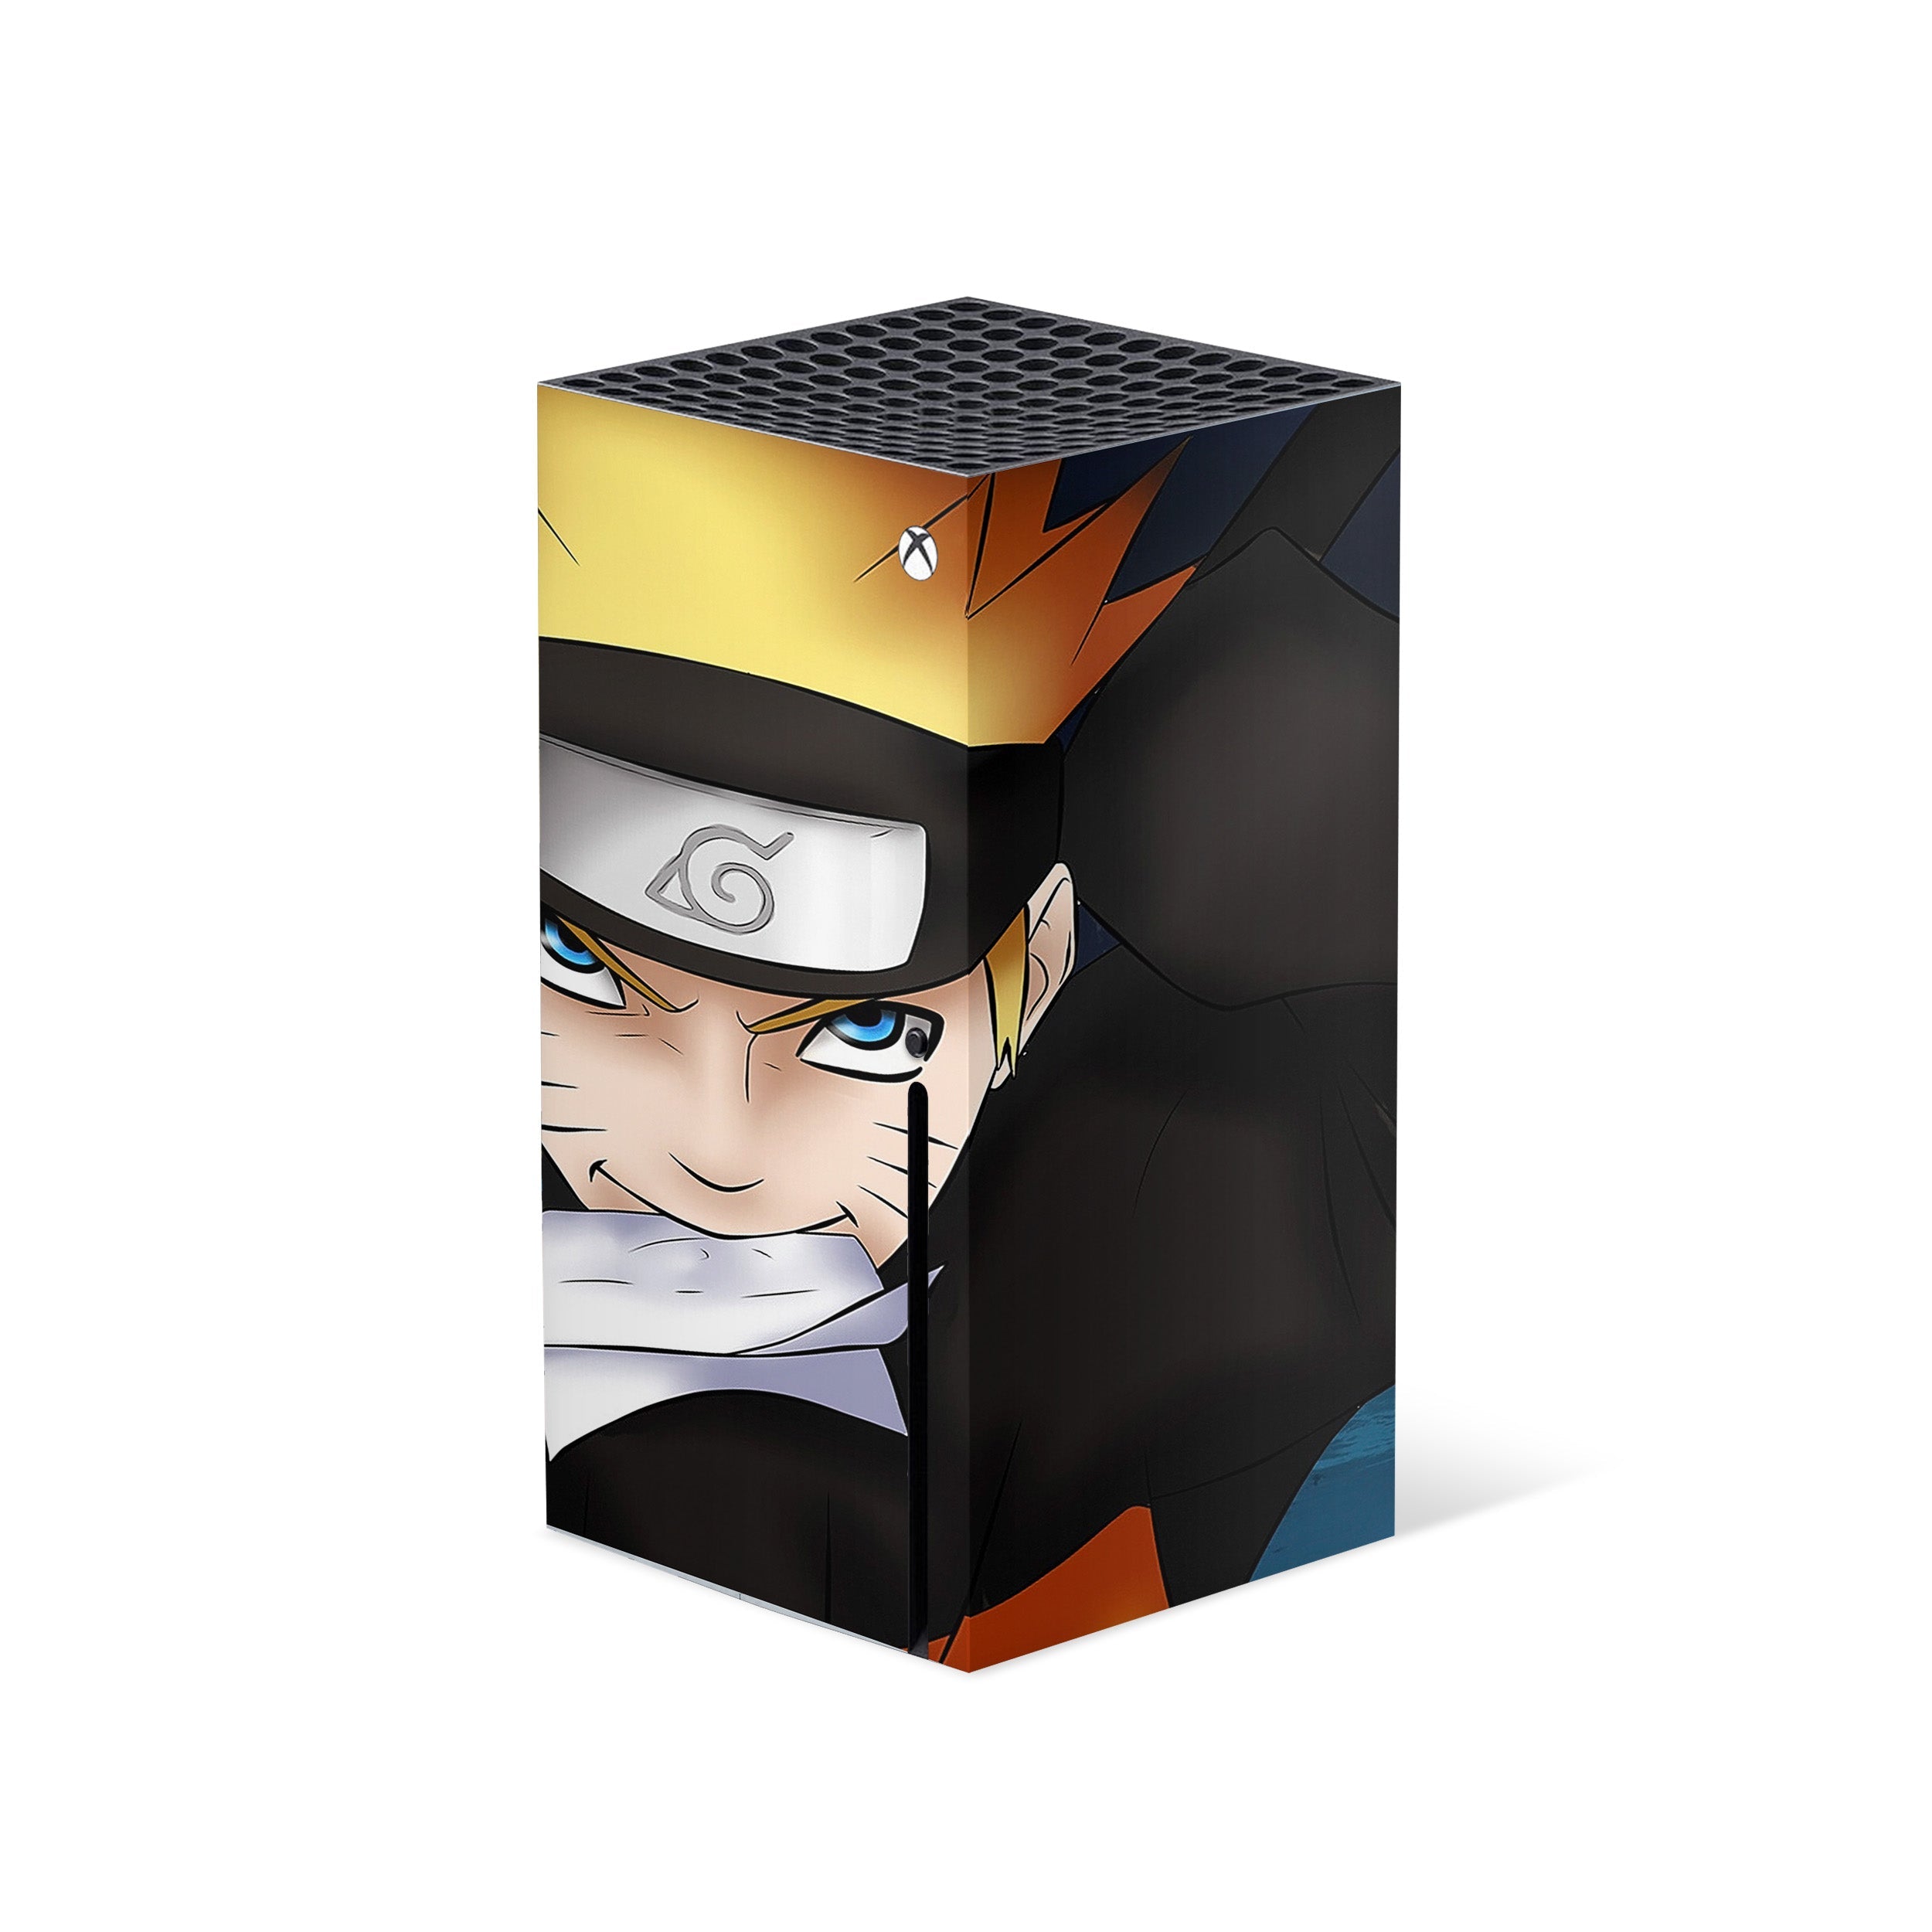 A video game skin featuring a Naruto Approach design for the Xbox Series X.